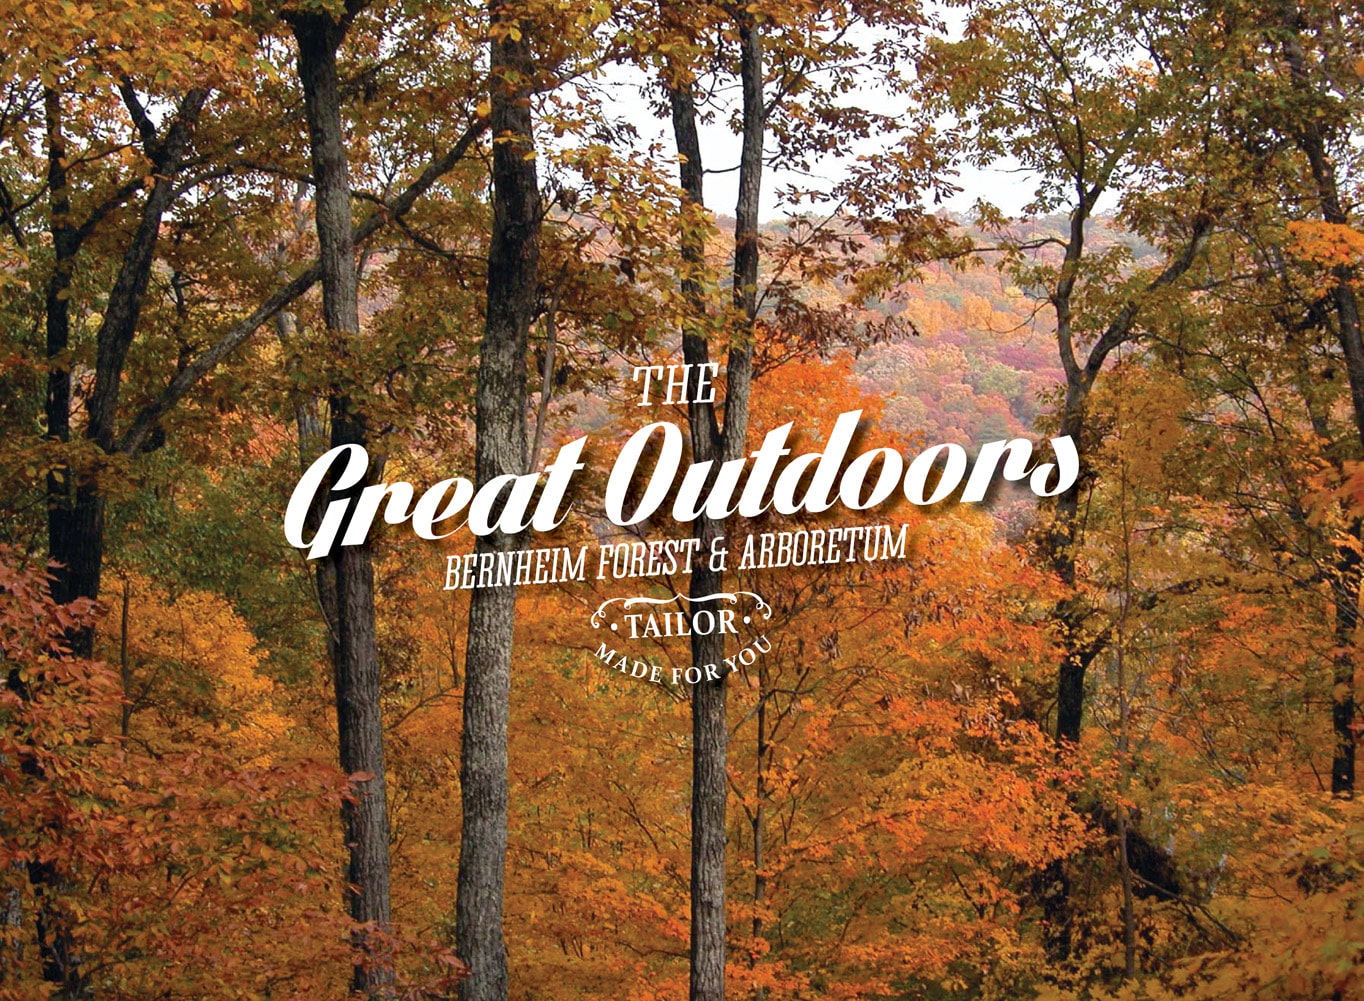 Website banner showcasing The Great Outdoors